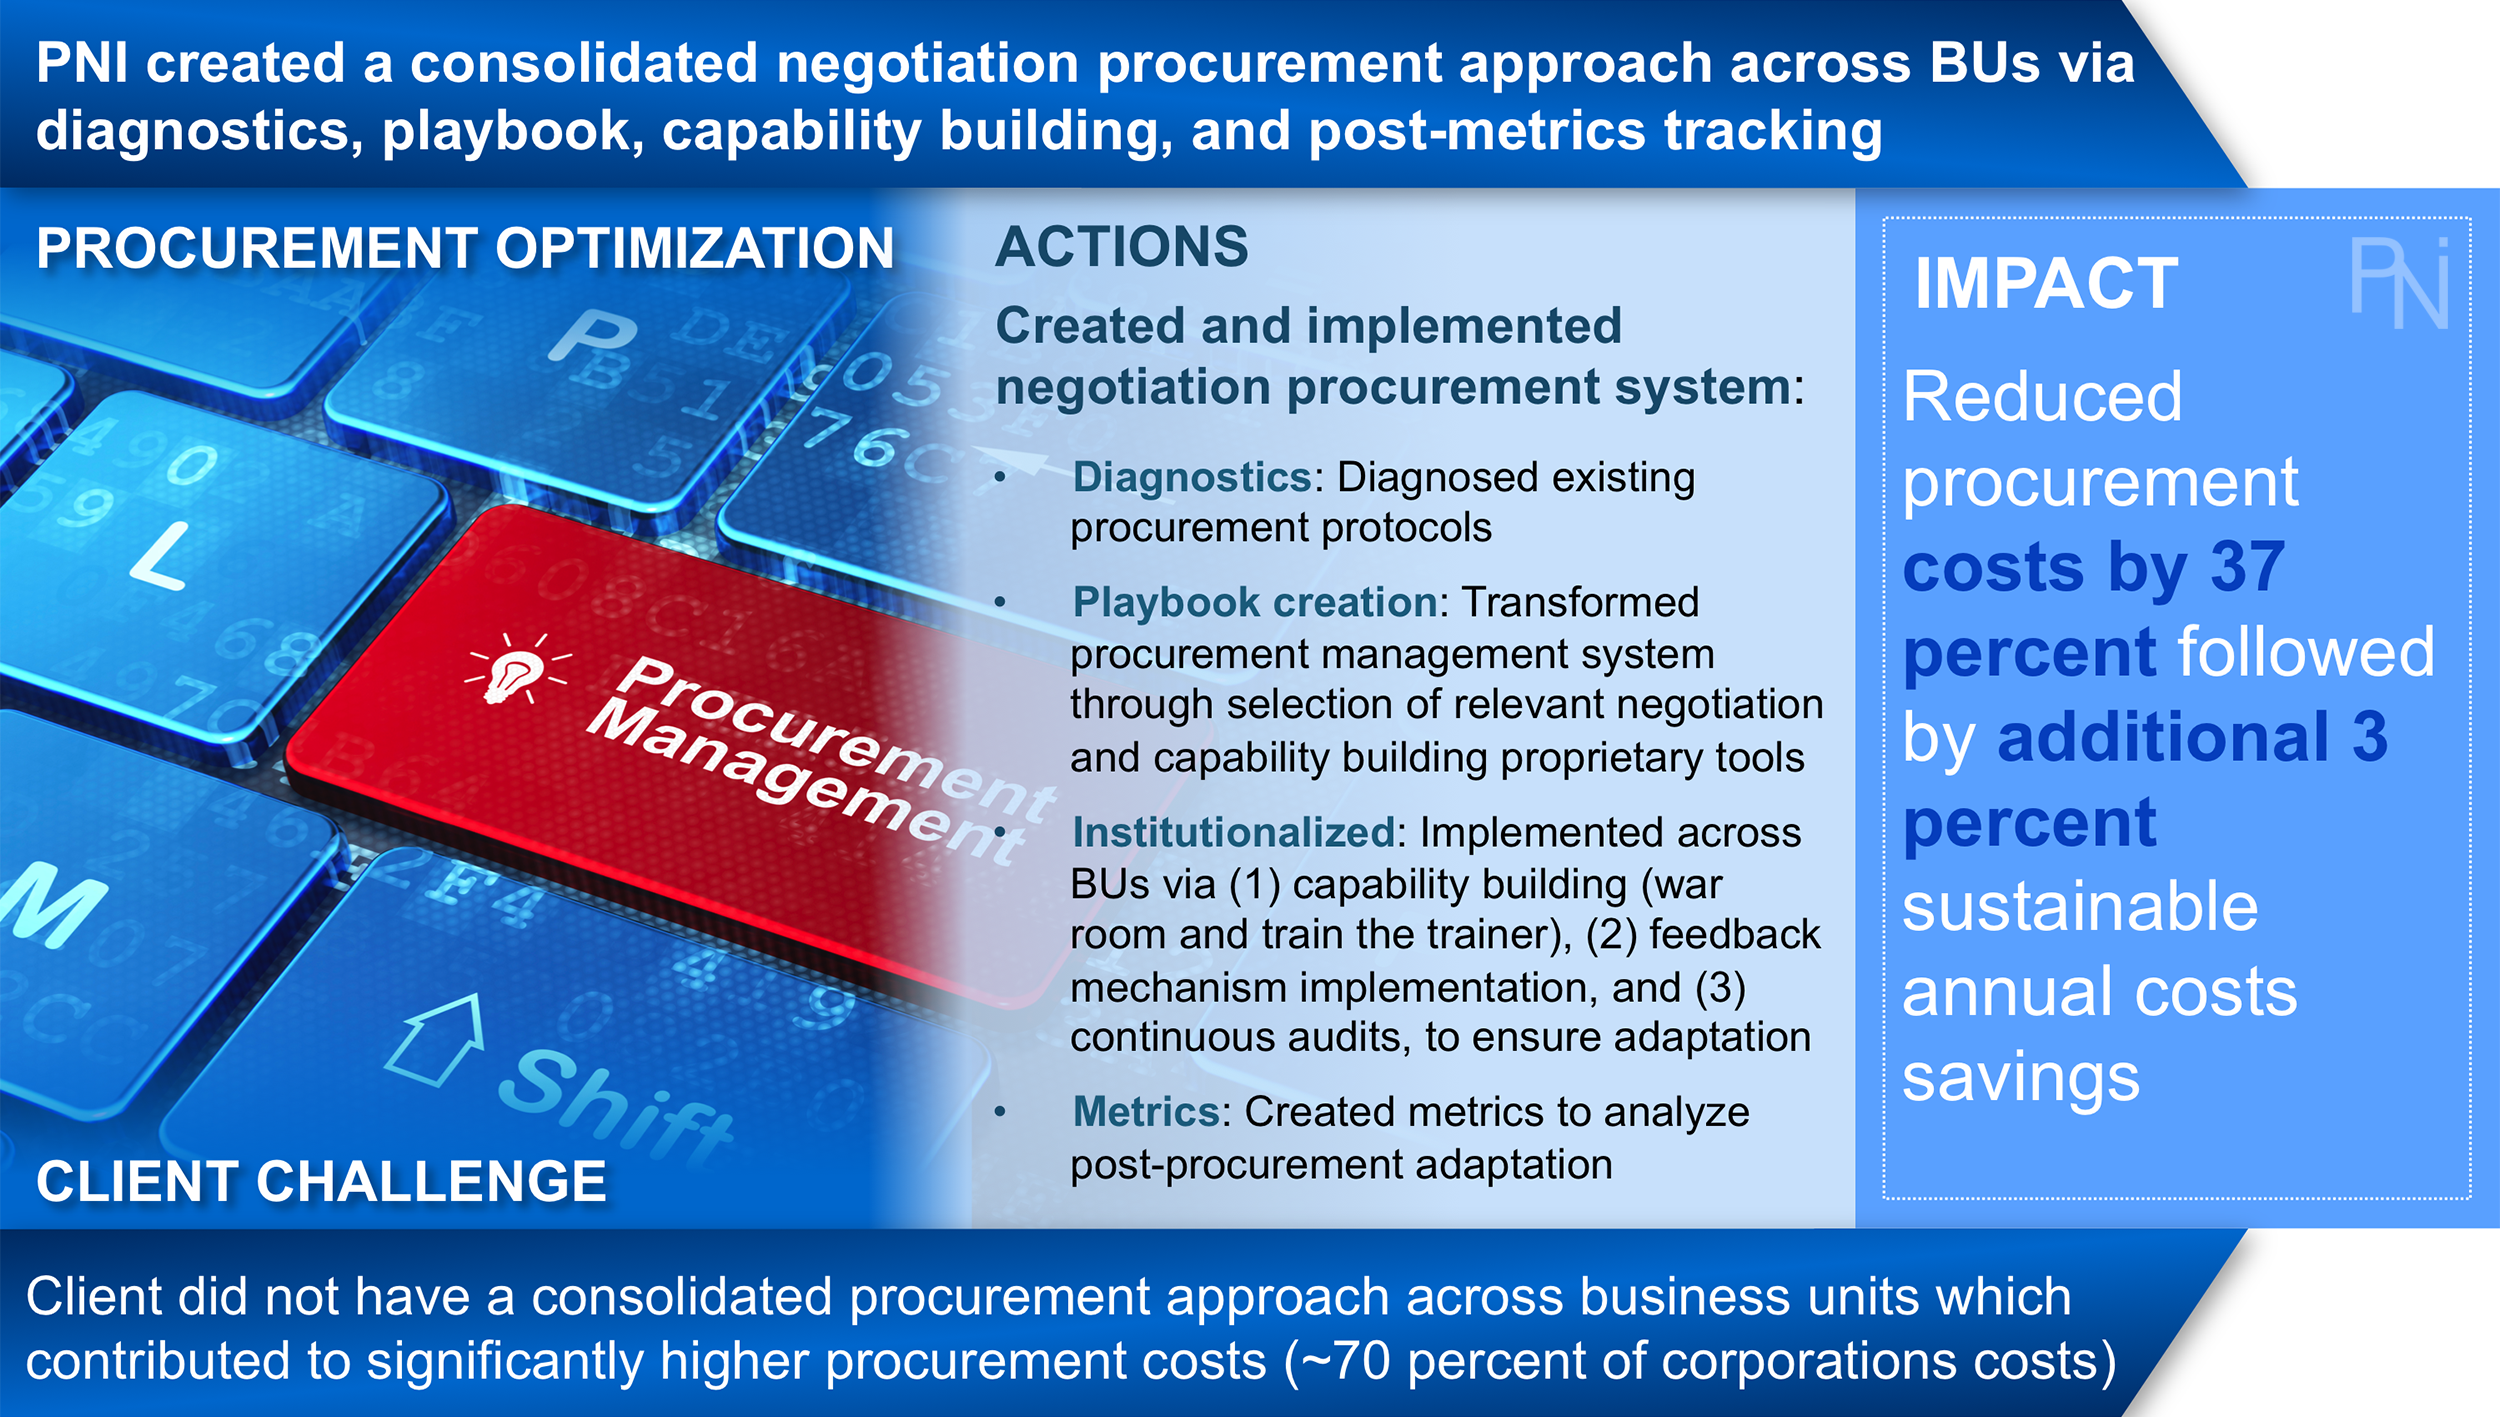 Procurement and Supply Chain Results 2 - PNI.png